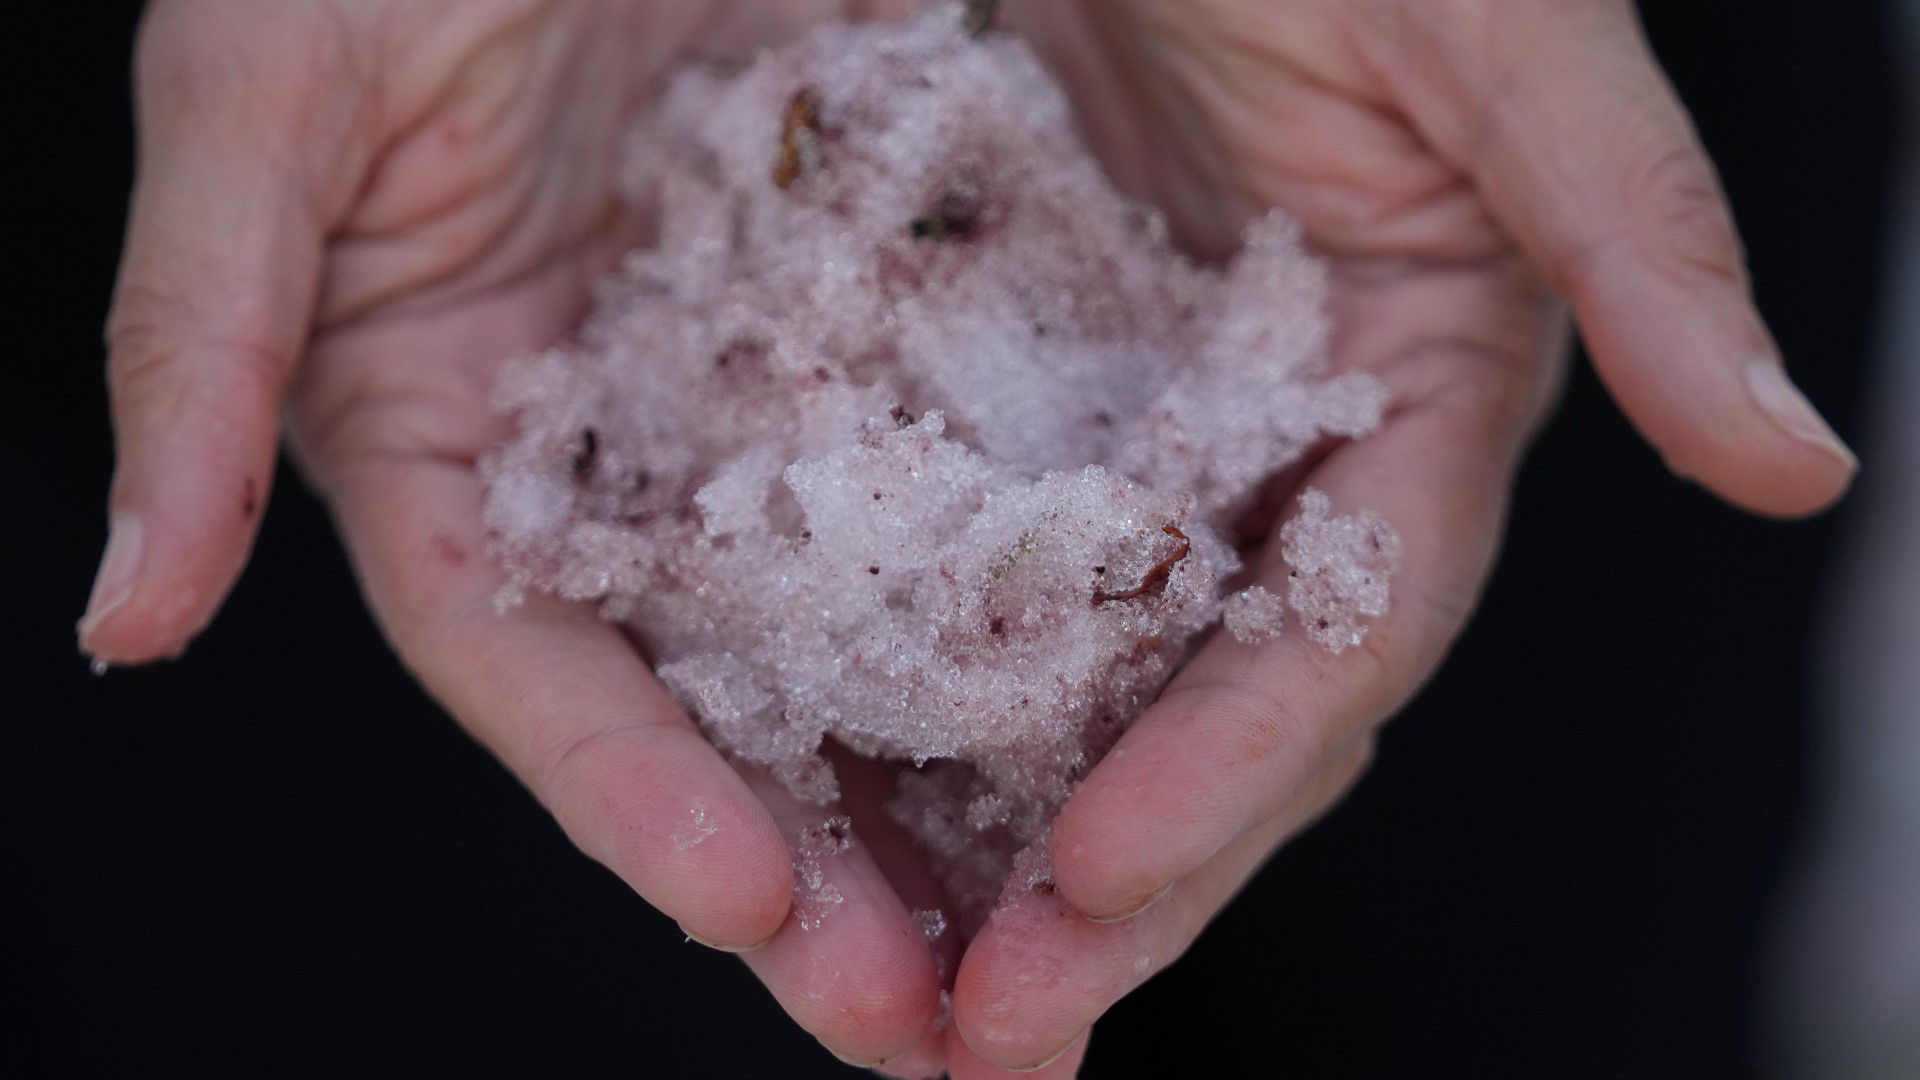 Patches of pinkish snow in parts of the Utah mountains that some call “watermelon snow” are attracting curious photo-seekers this summer.